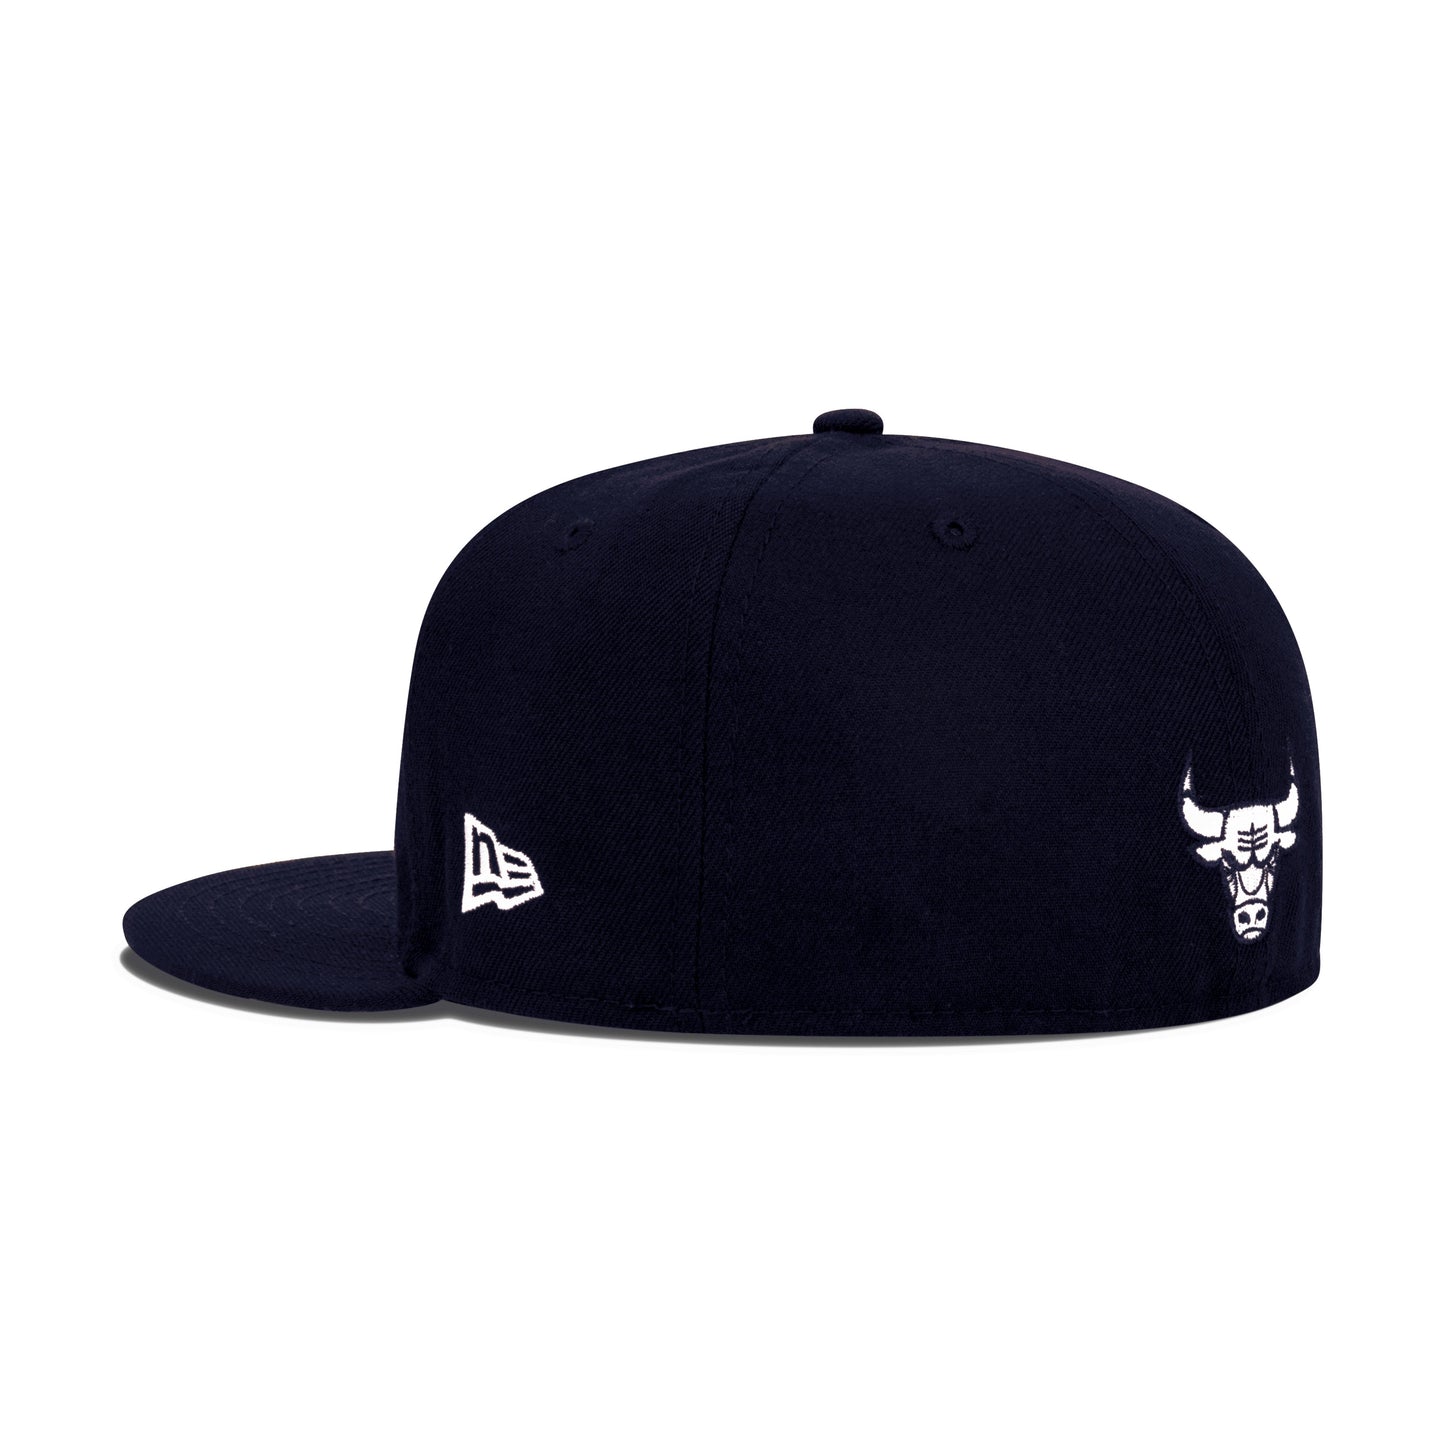 New Era Chicago Bulls Fitted Grey Bottom "Navy White" (6X Champs Embroidery)